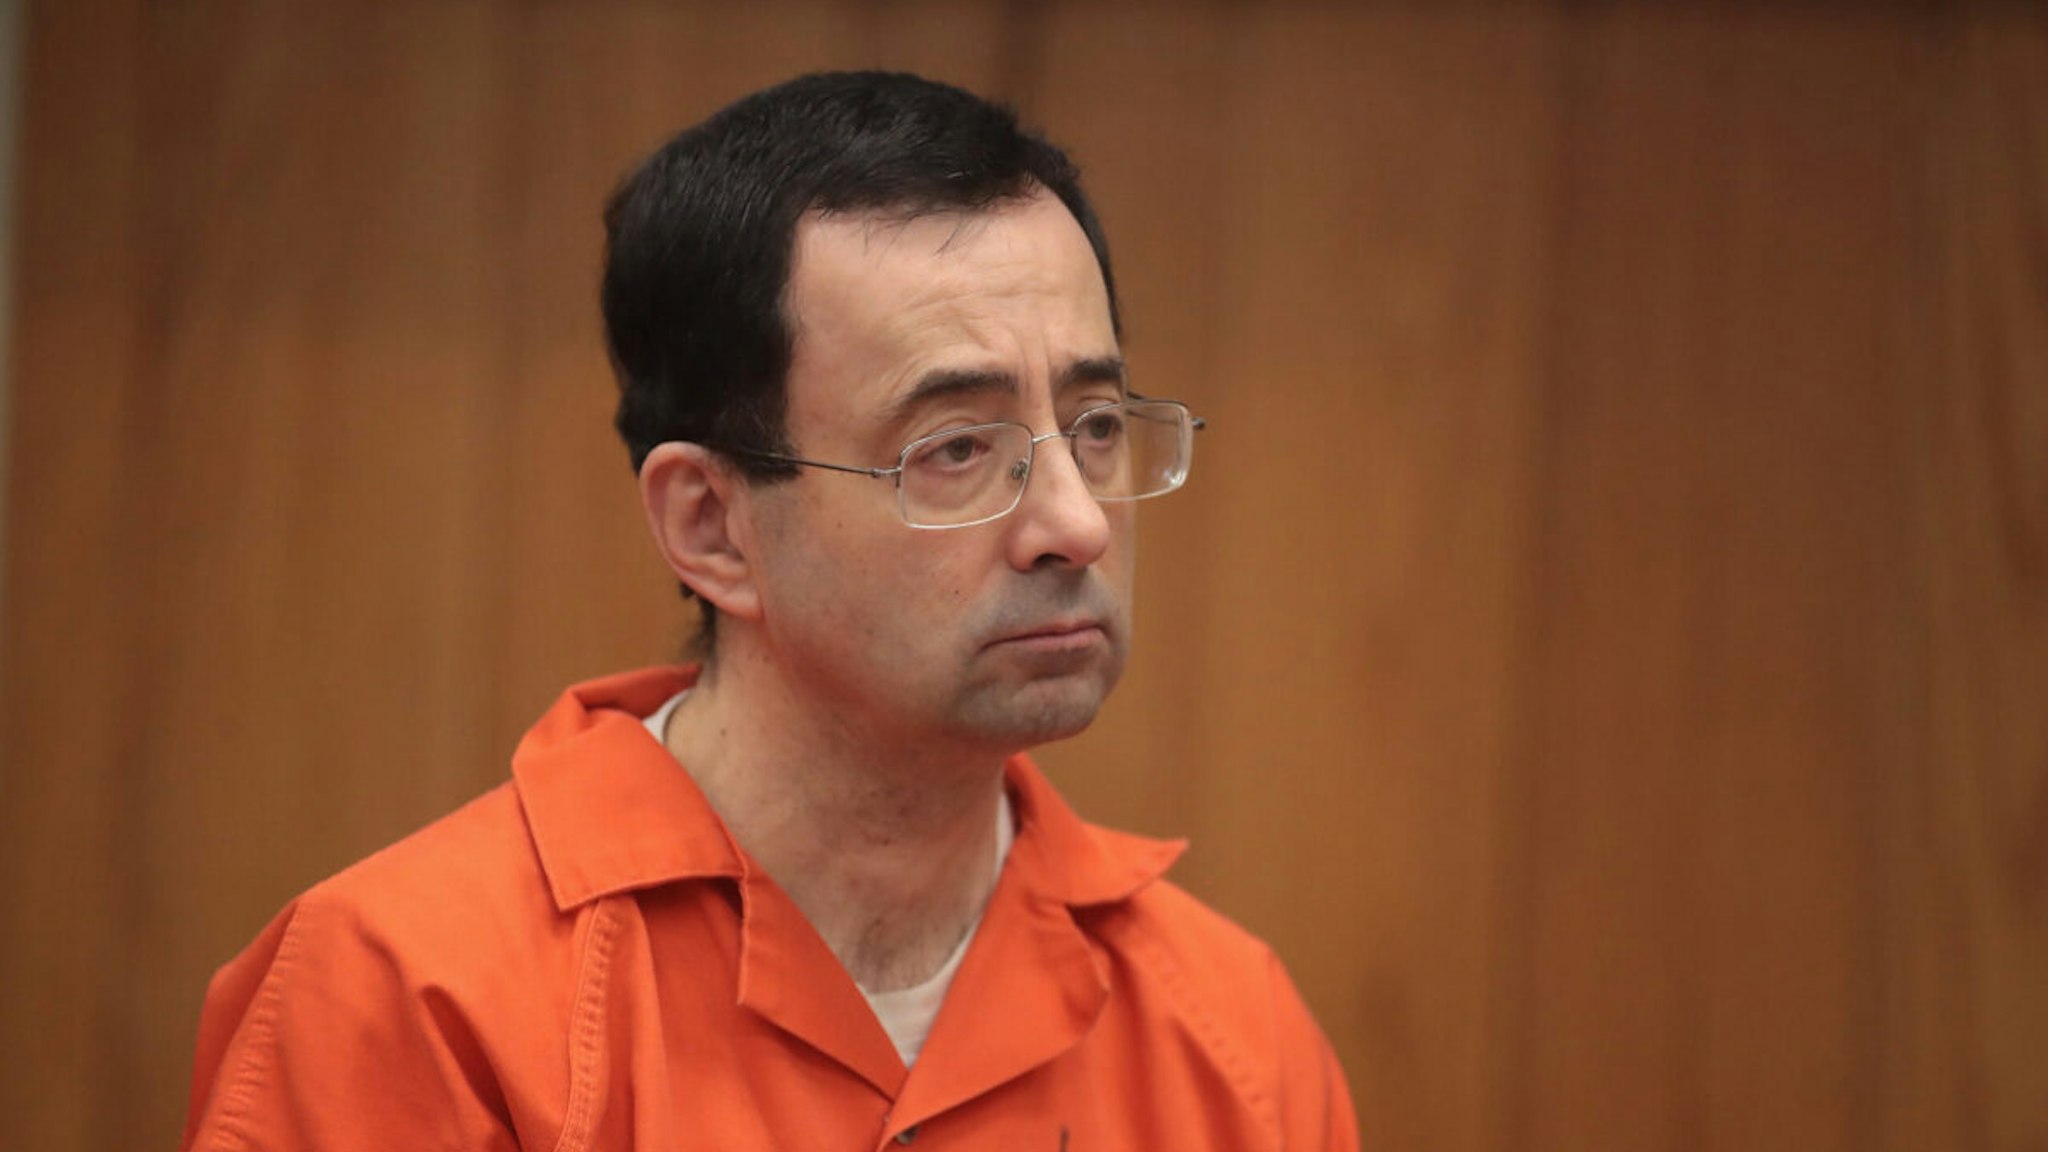 CHARLOTTE, MI - FEBRUARY 05: Larry Nassar stands as he is sentenced by Judge Janice Cunningham for three counts of criminal sexual assault in Eaton County Circuit Court on February 5, 2018 in Charlotte, Michigan. Nassar has been accused of sexually assaulting more than 150 girls and young women while he was a physician for USA Gymnastics and Michigan State University. Cunningham sentenced Nassar to 40 to 125 years in prison. He is currently serving a 60-year sentence in federal prison for possession of child pornography. Last month a judge in Ingham County, Michigan sentenced Nassar to an 40 to 175 years in prison after he plead guilty to sexually assaulting seven girls.